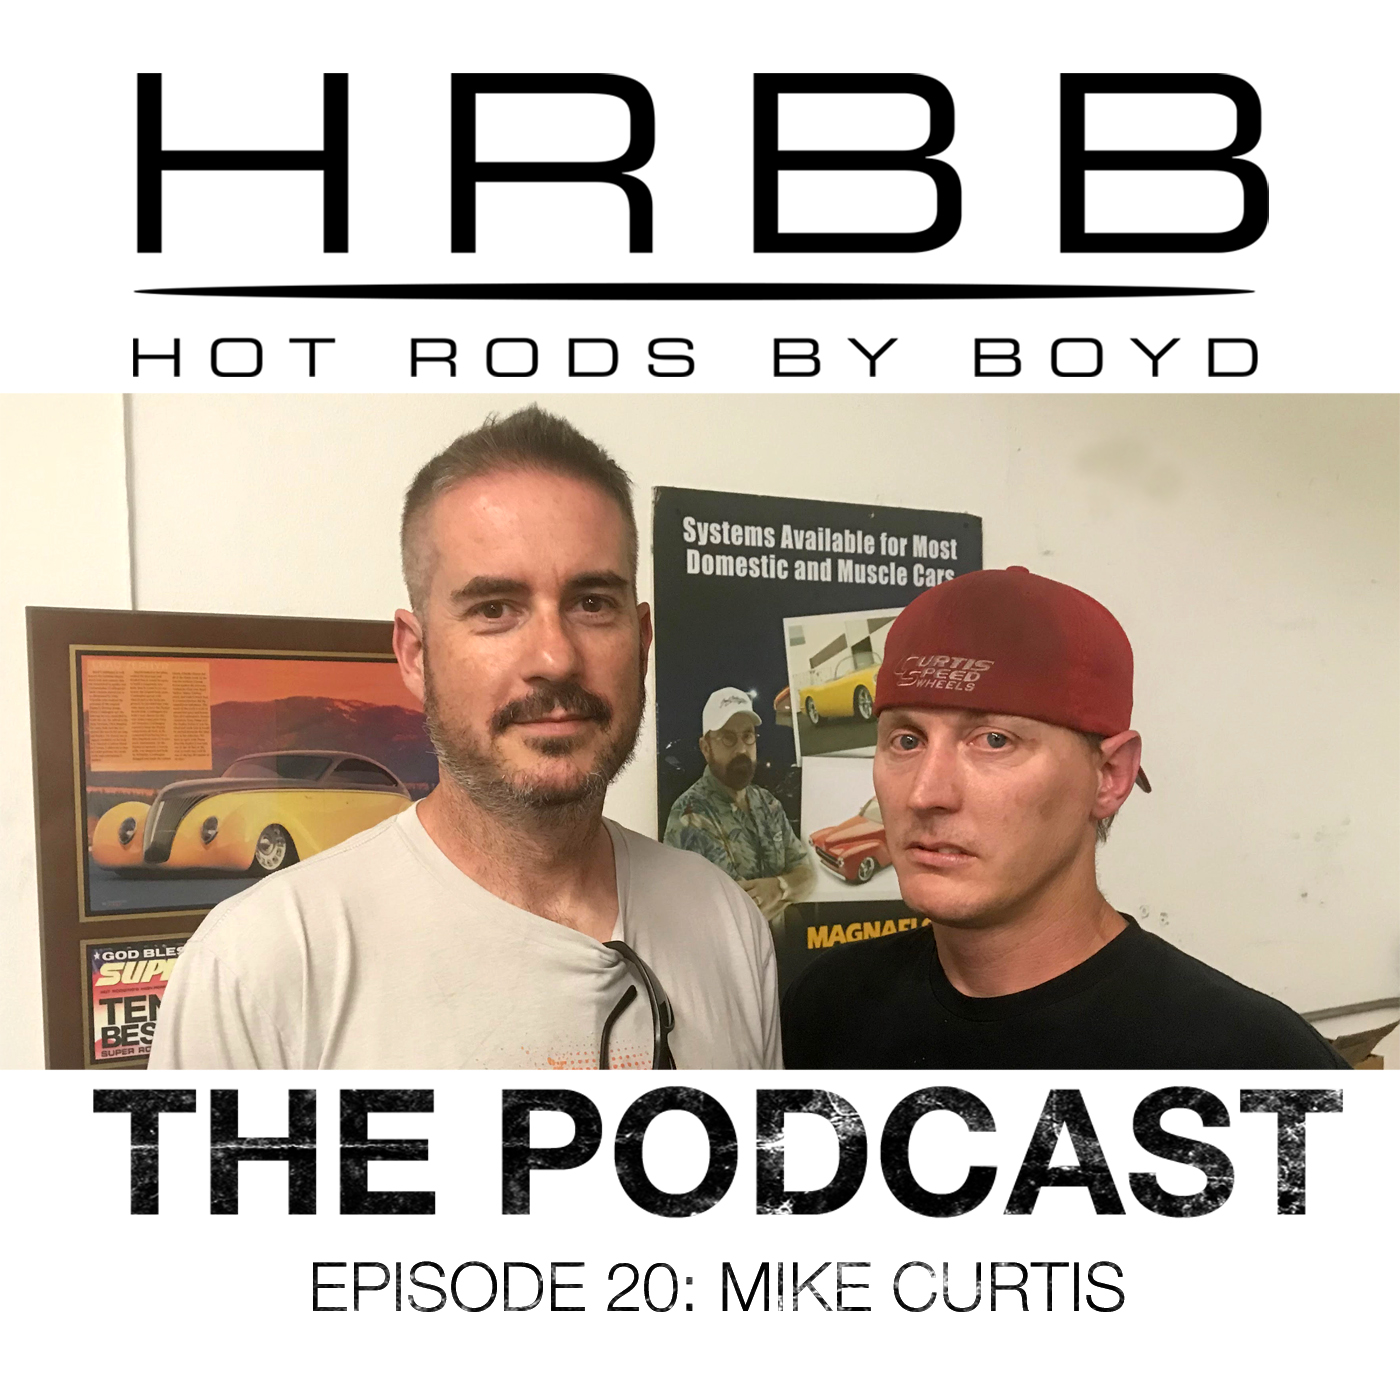 HRBB Podcast Ep20 - Mike Curtis